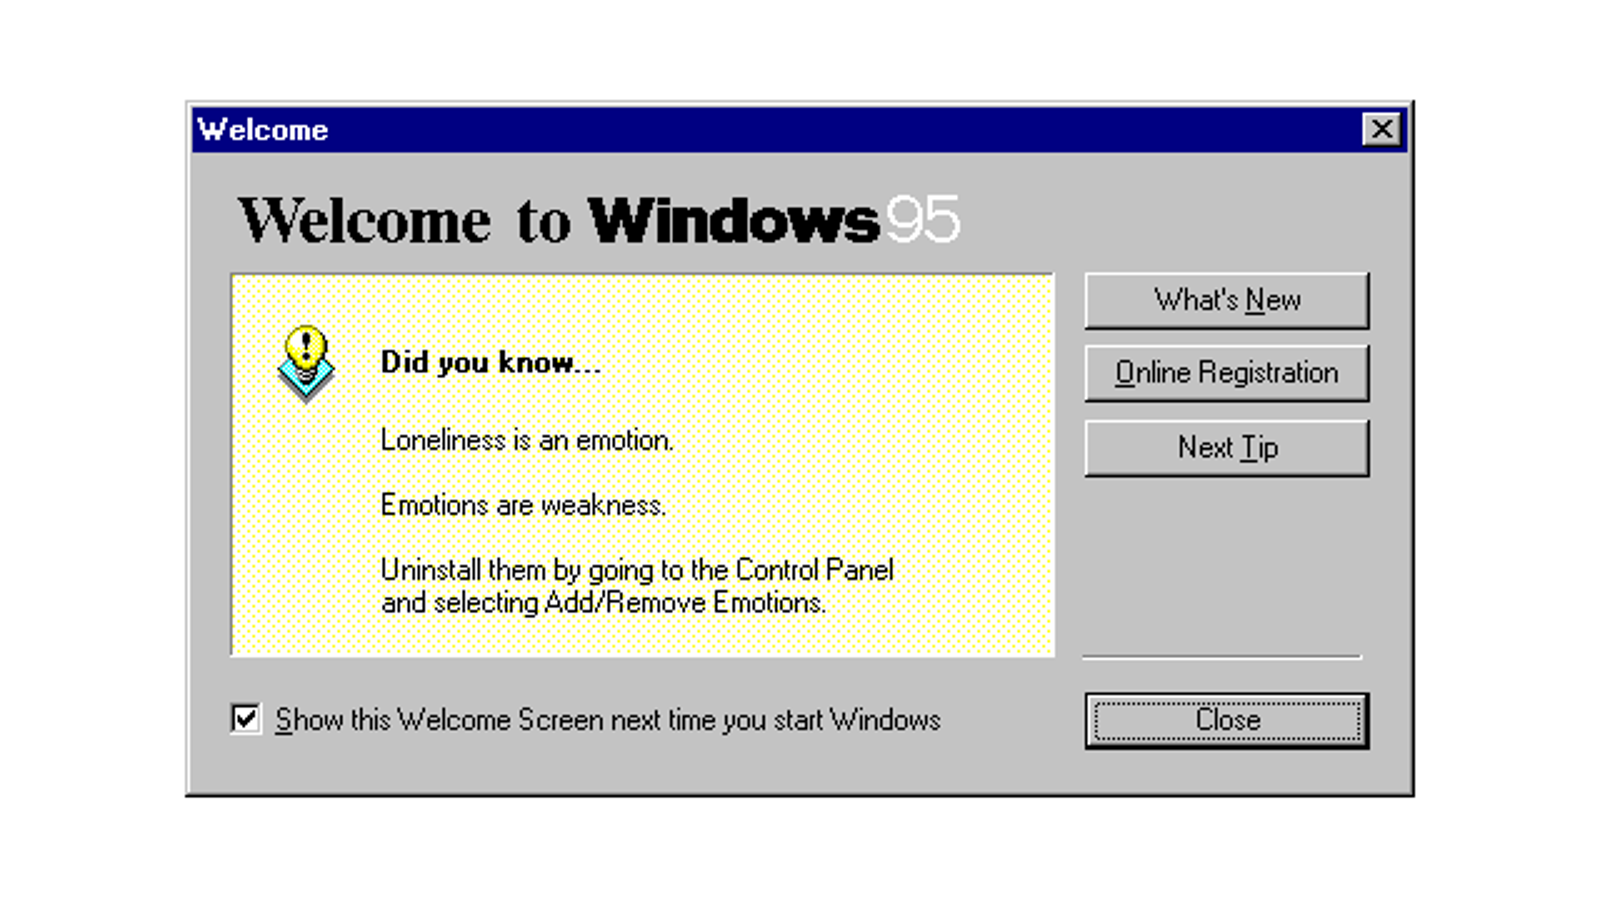 These Are the Windows 95 Tips We All Really Wanted